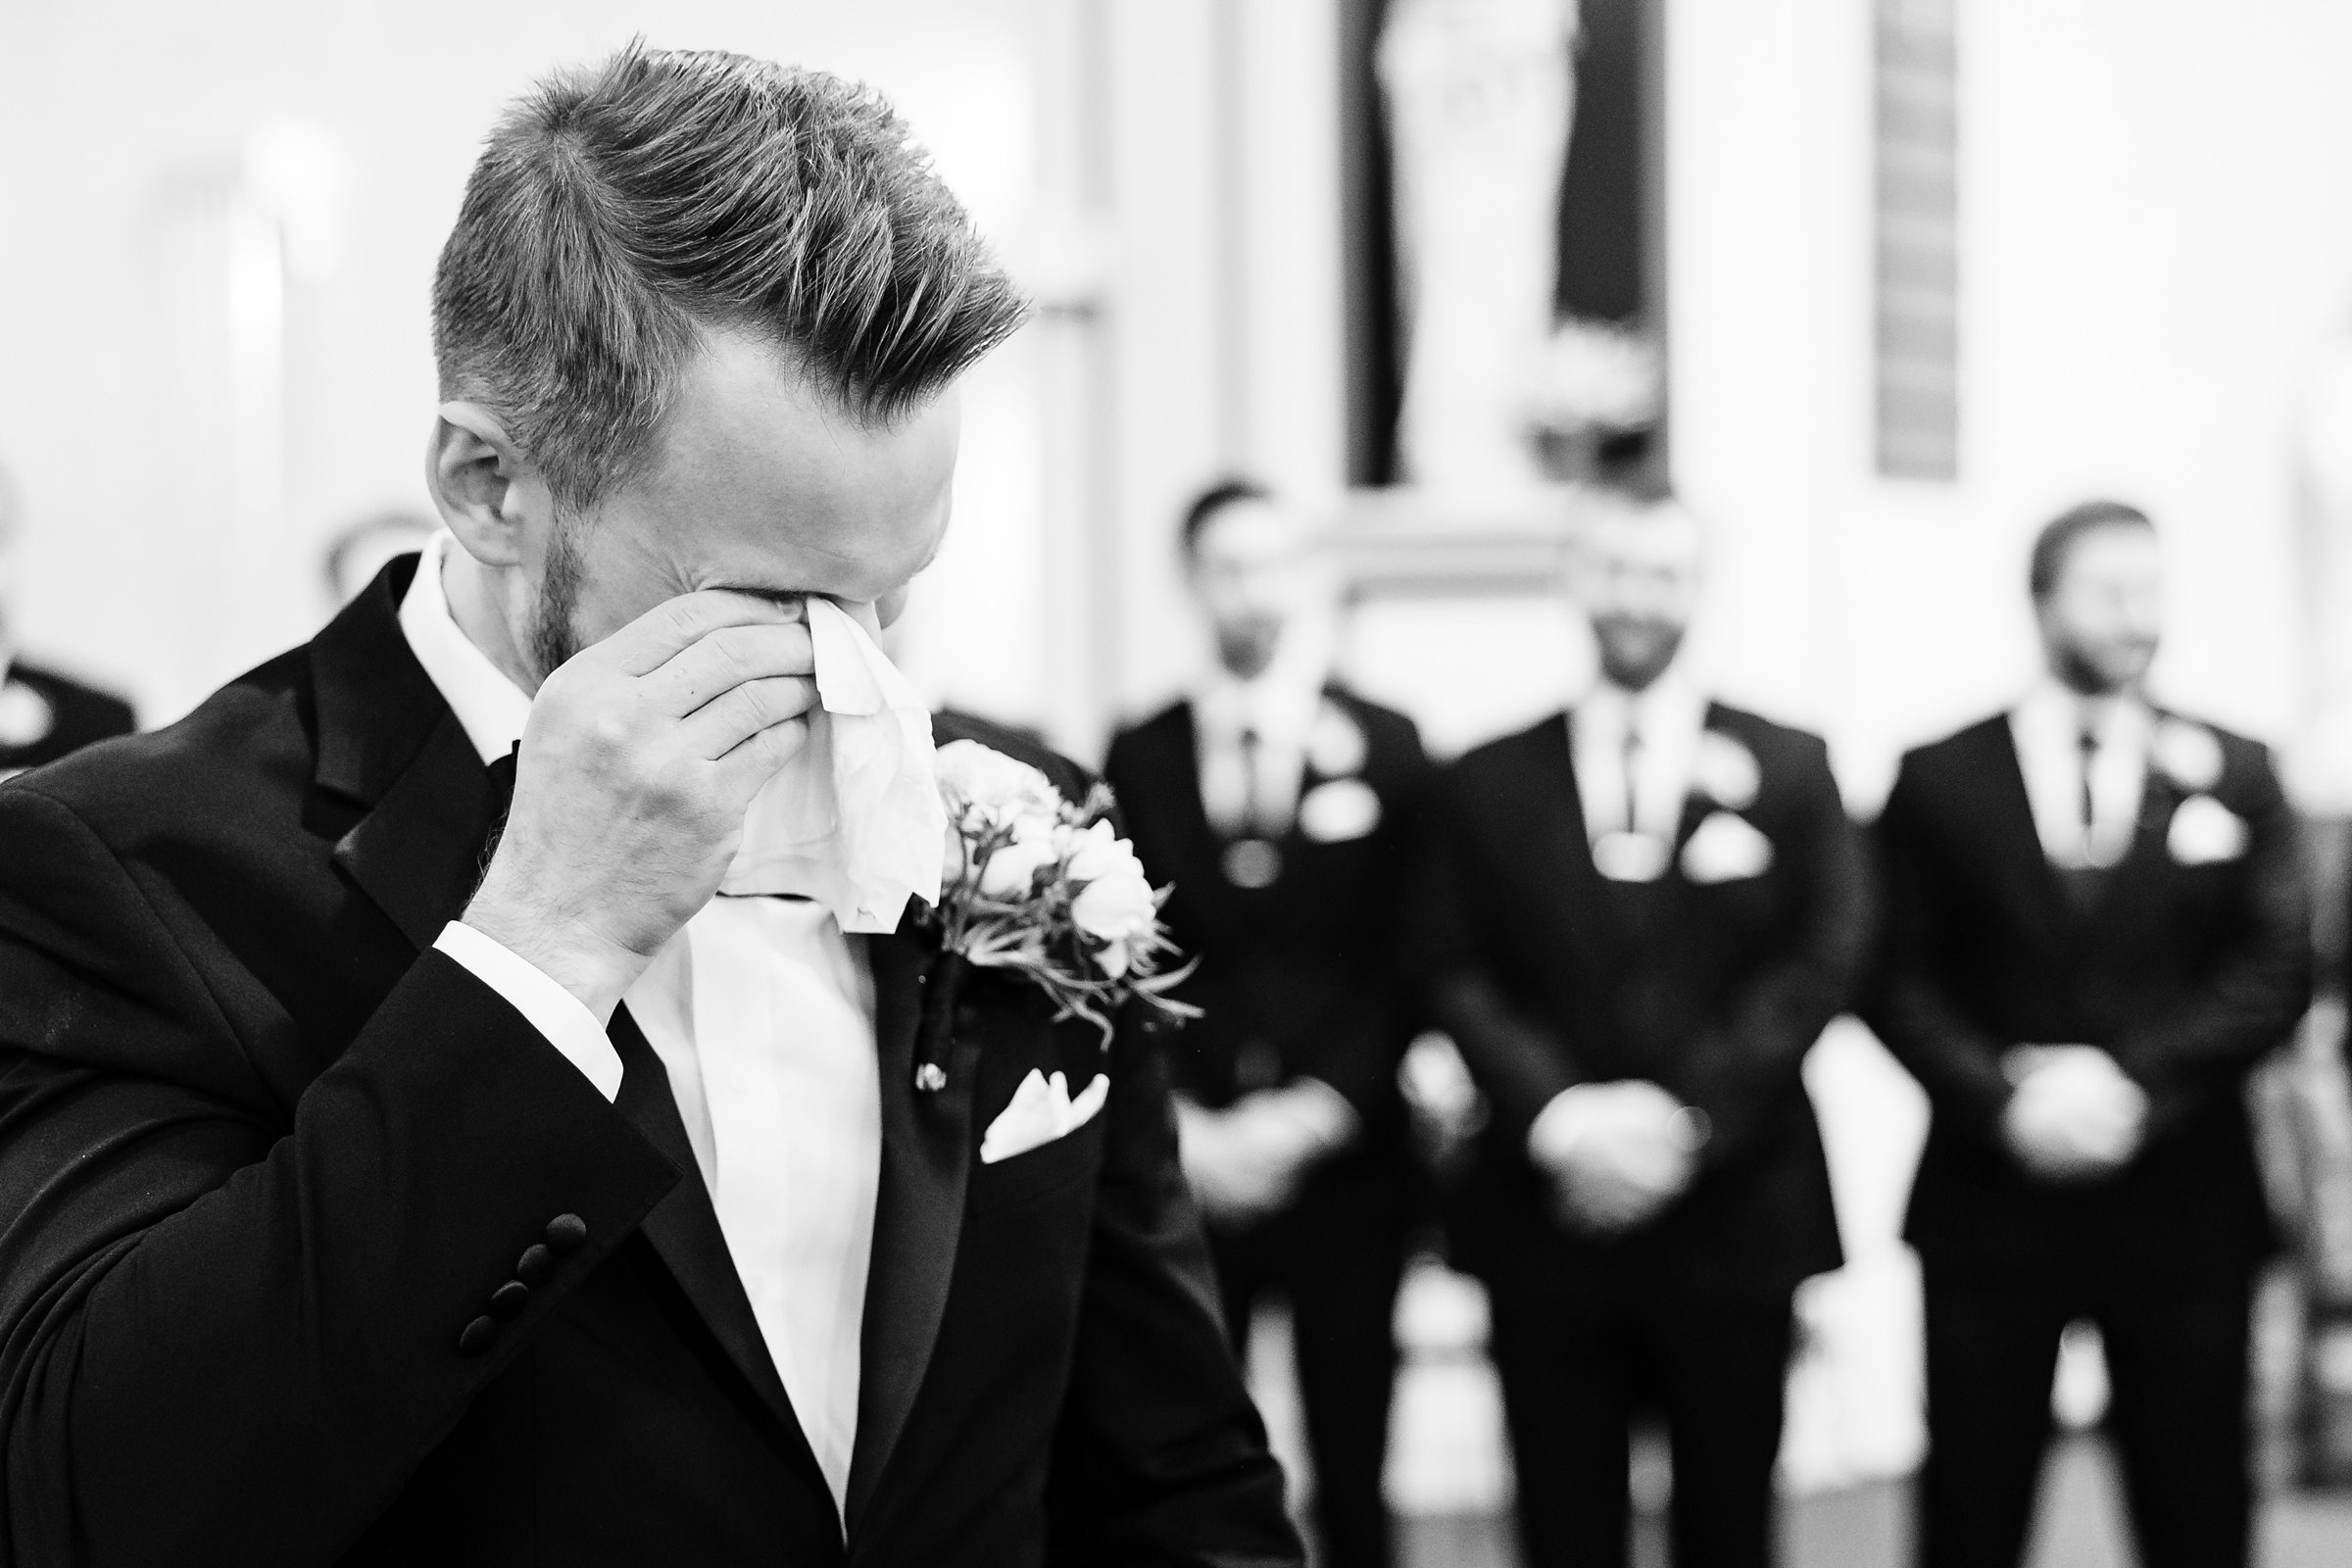 Groom gets emotional during his wedding at Our Lady of the Wayside Church in Illinois.